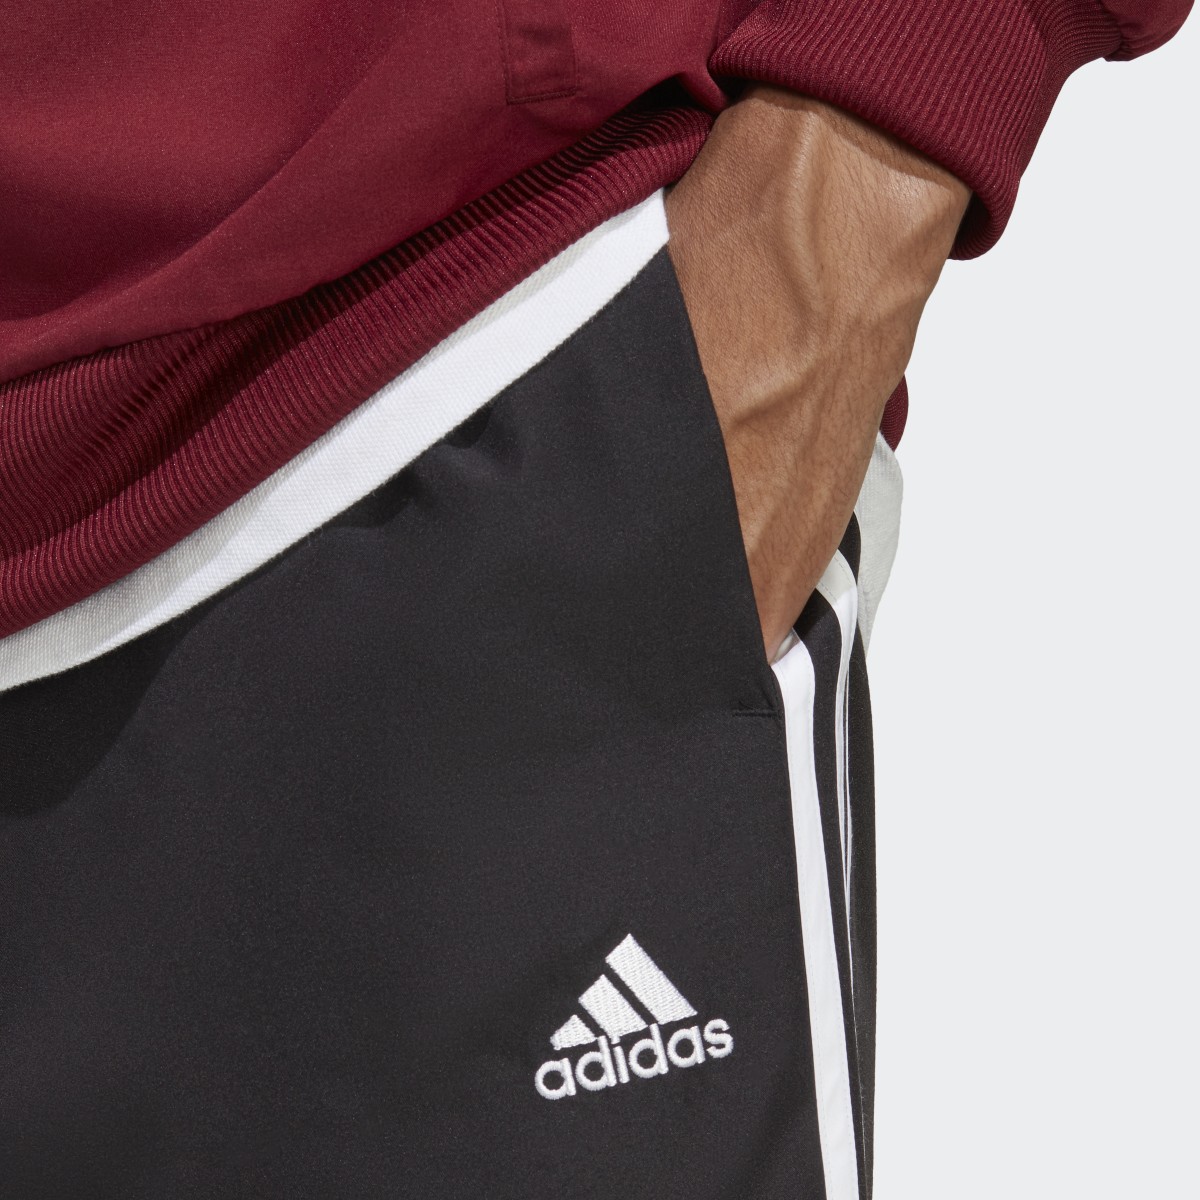 Adidas 3-Stripes Woven Track Suit. 9